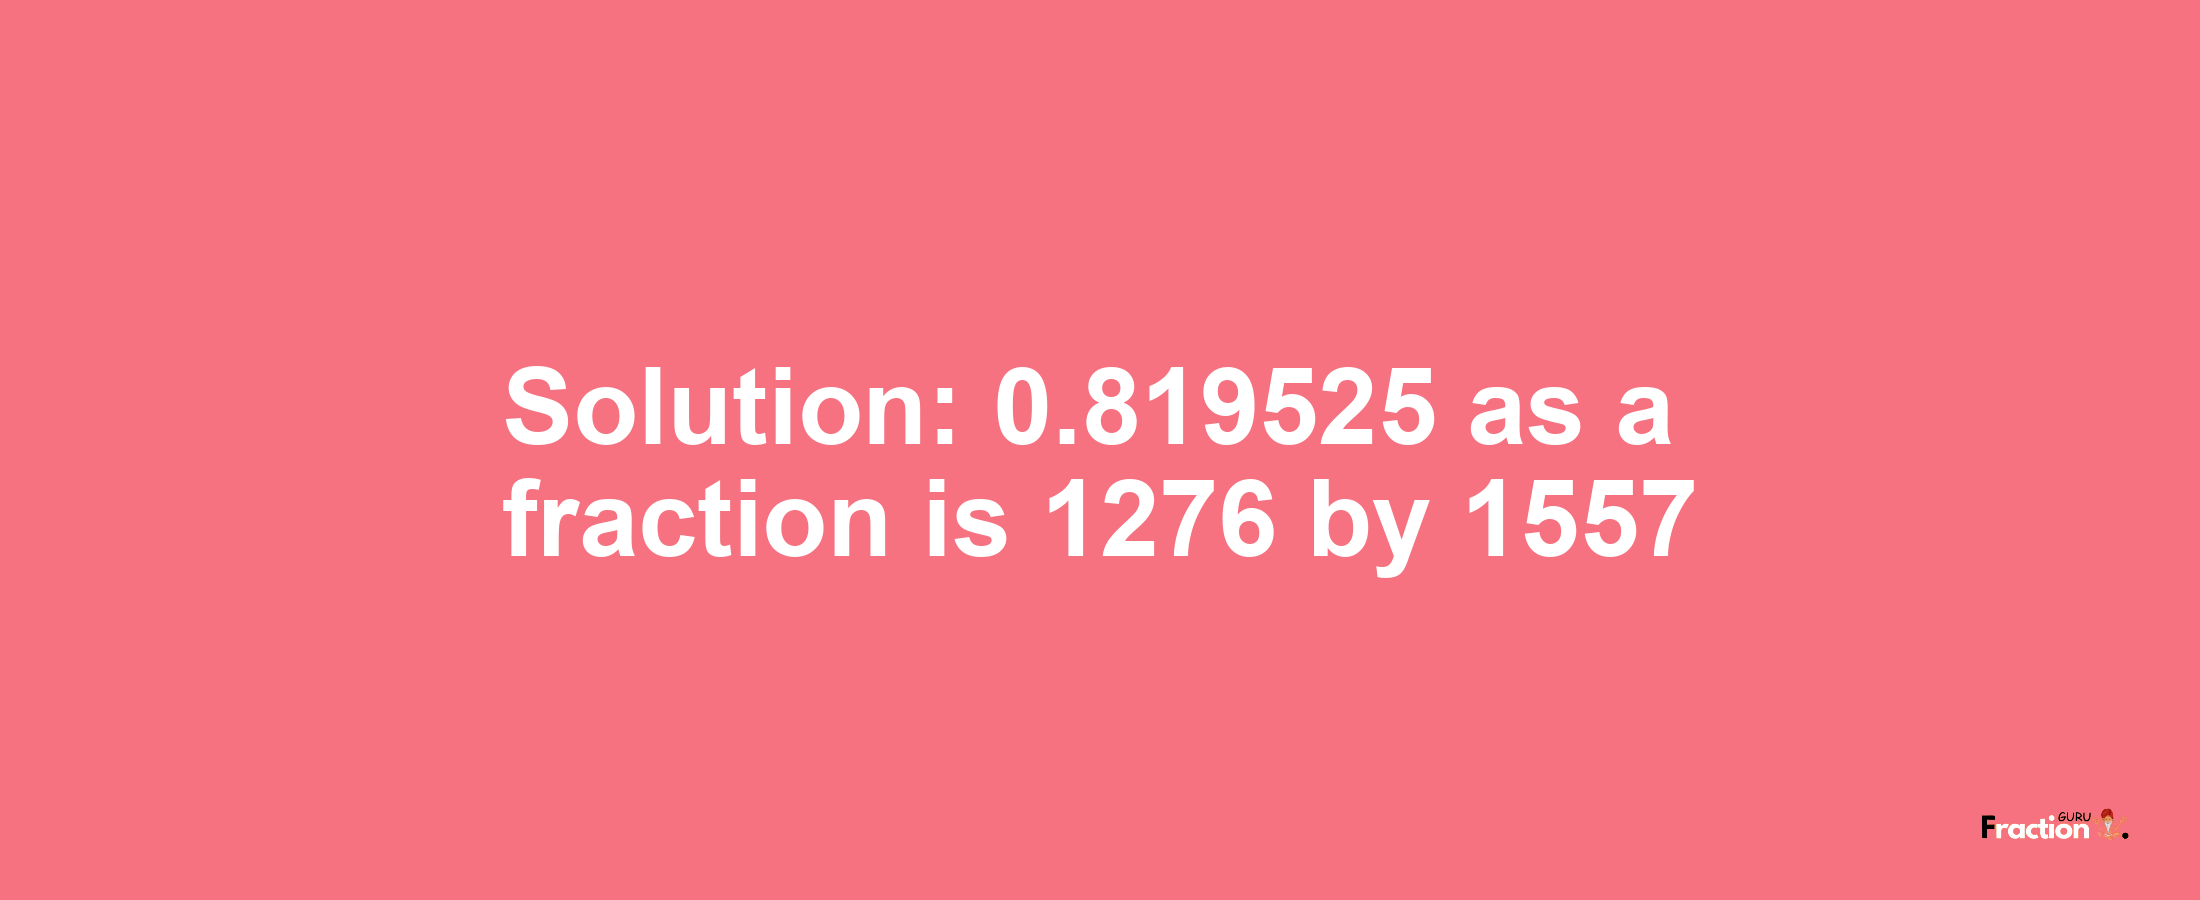 Solution:0.819525 as a fraction is 1276/1557